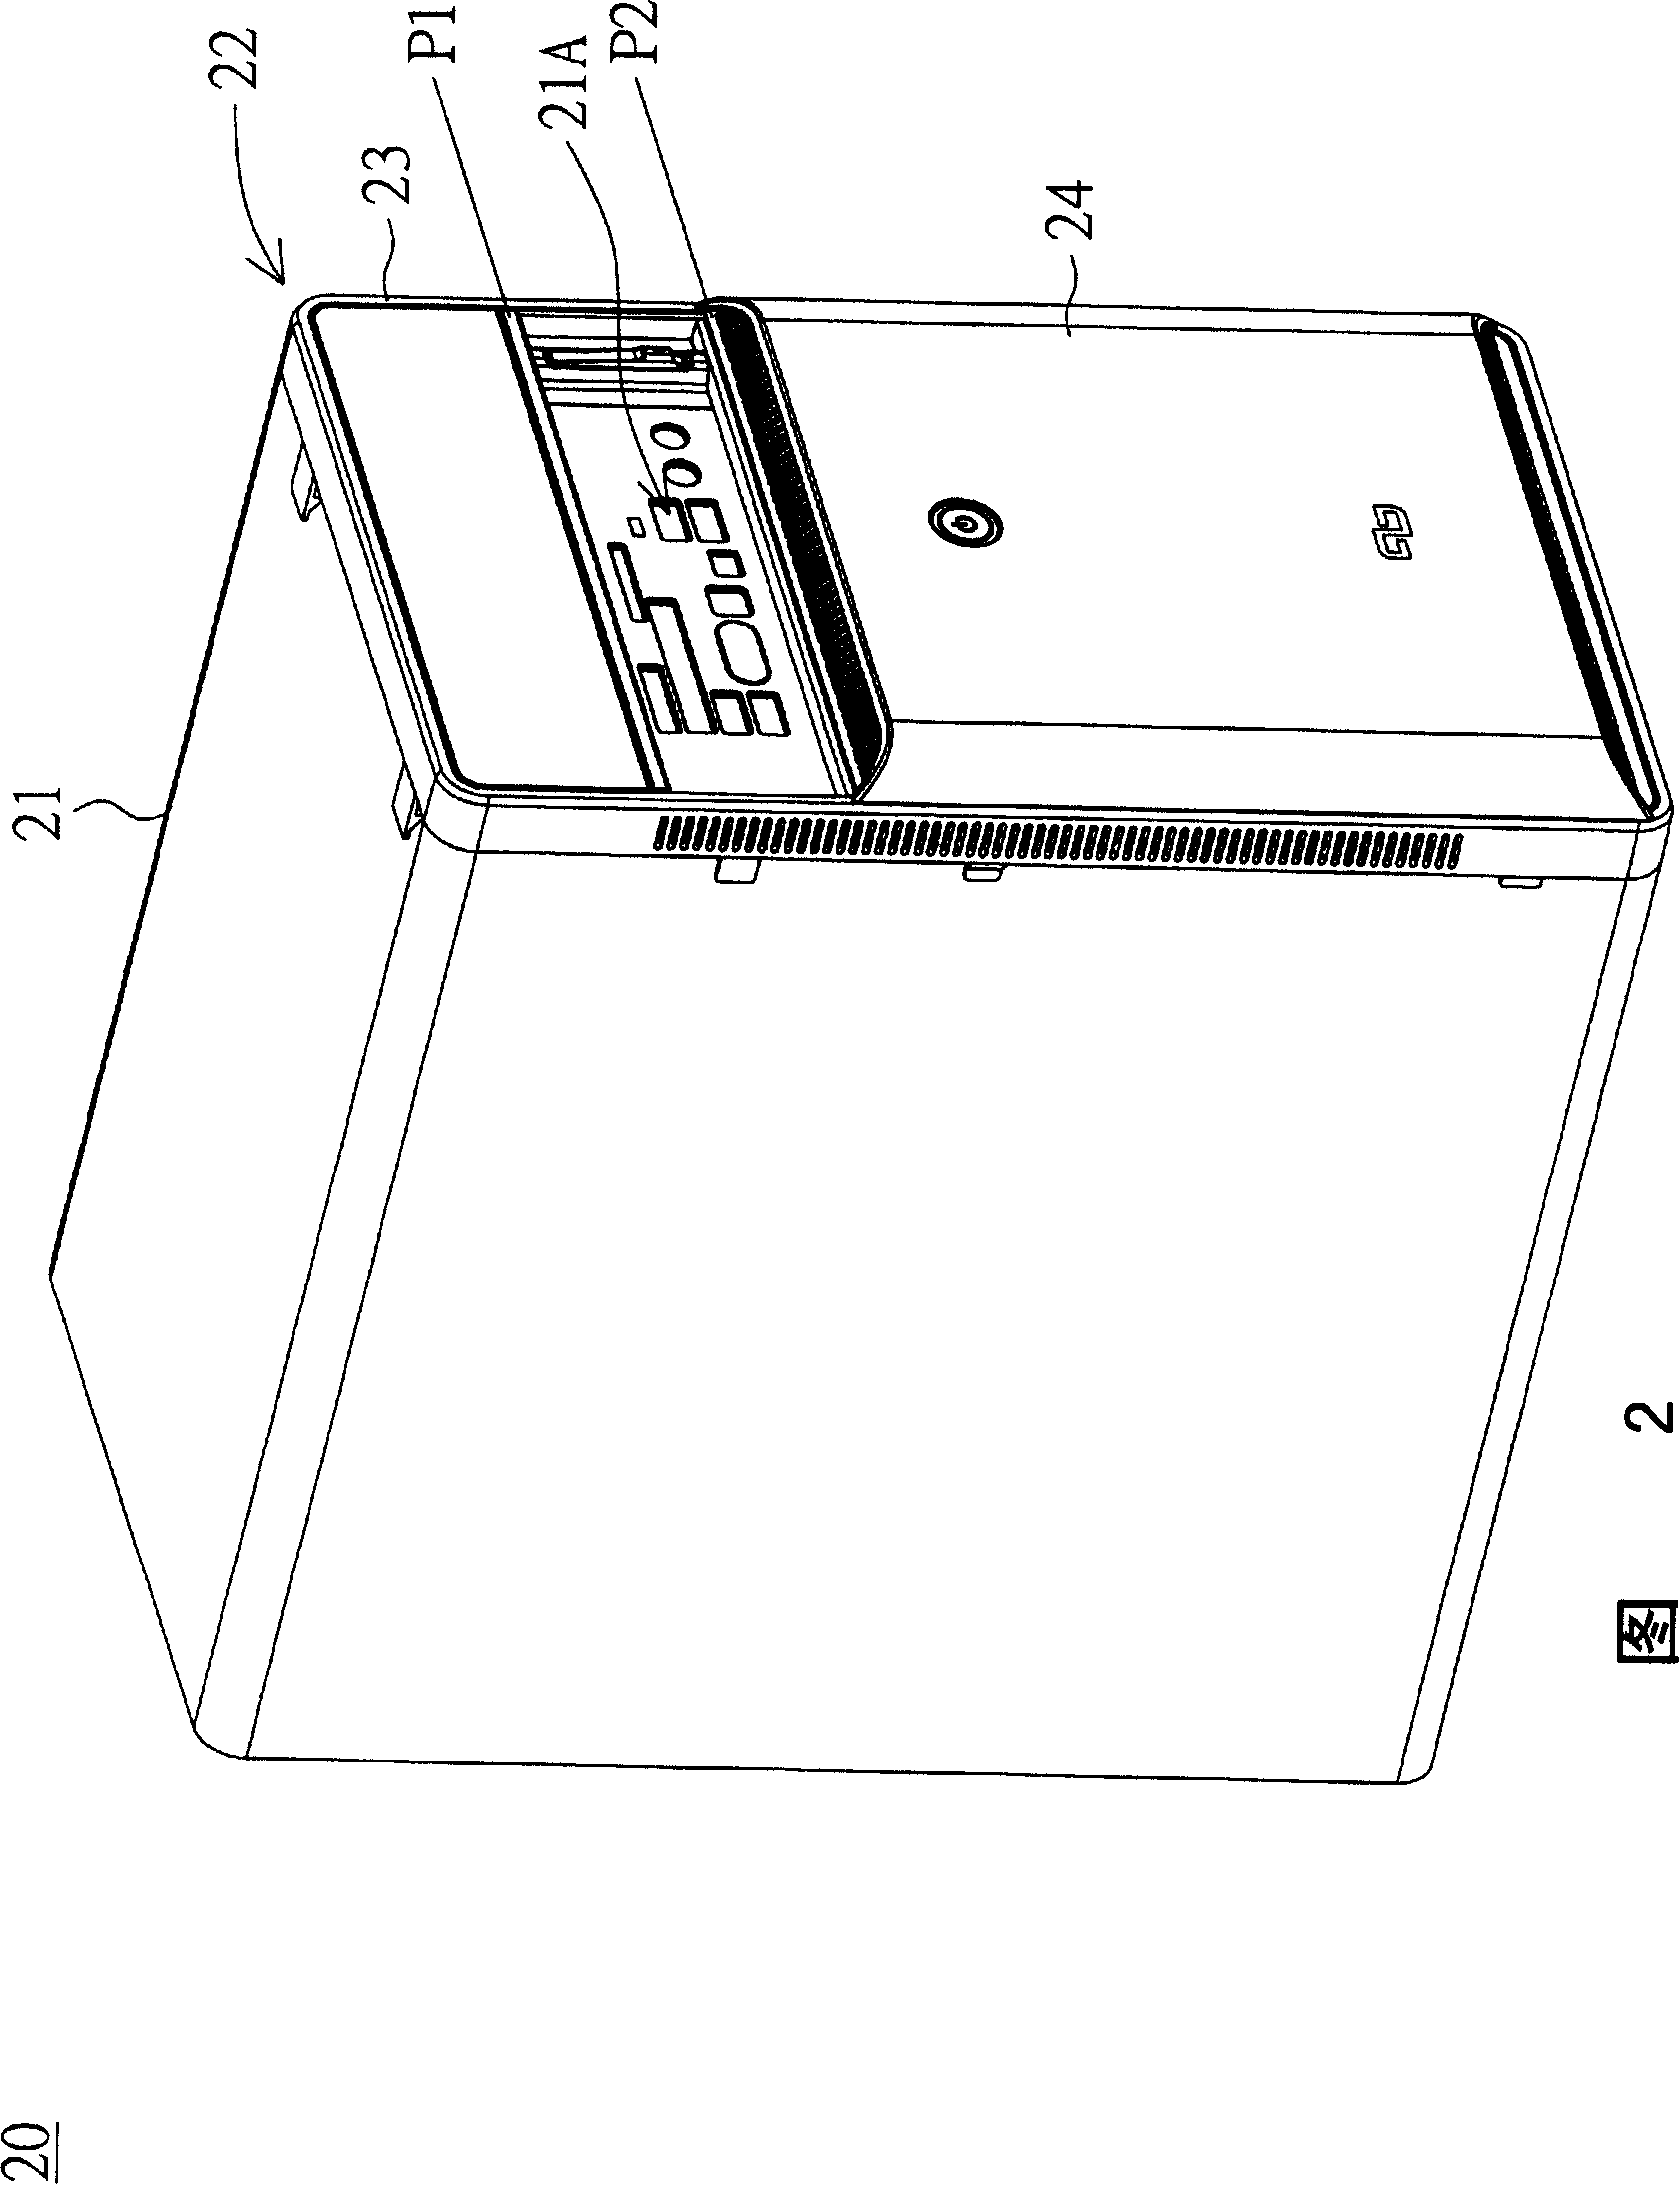 Sliding closure panel and electronic device using the sliding closure panel